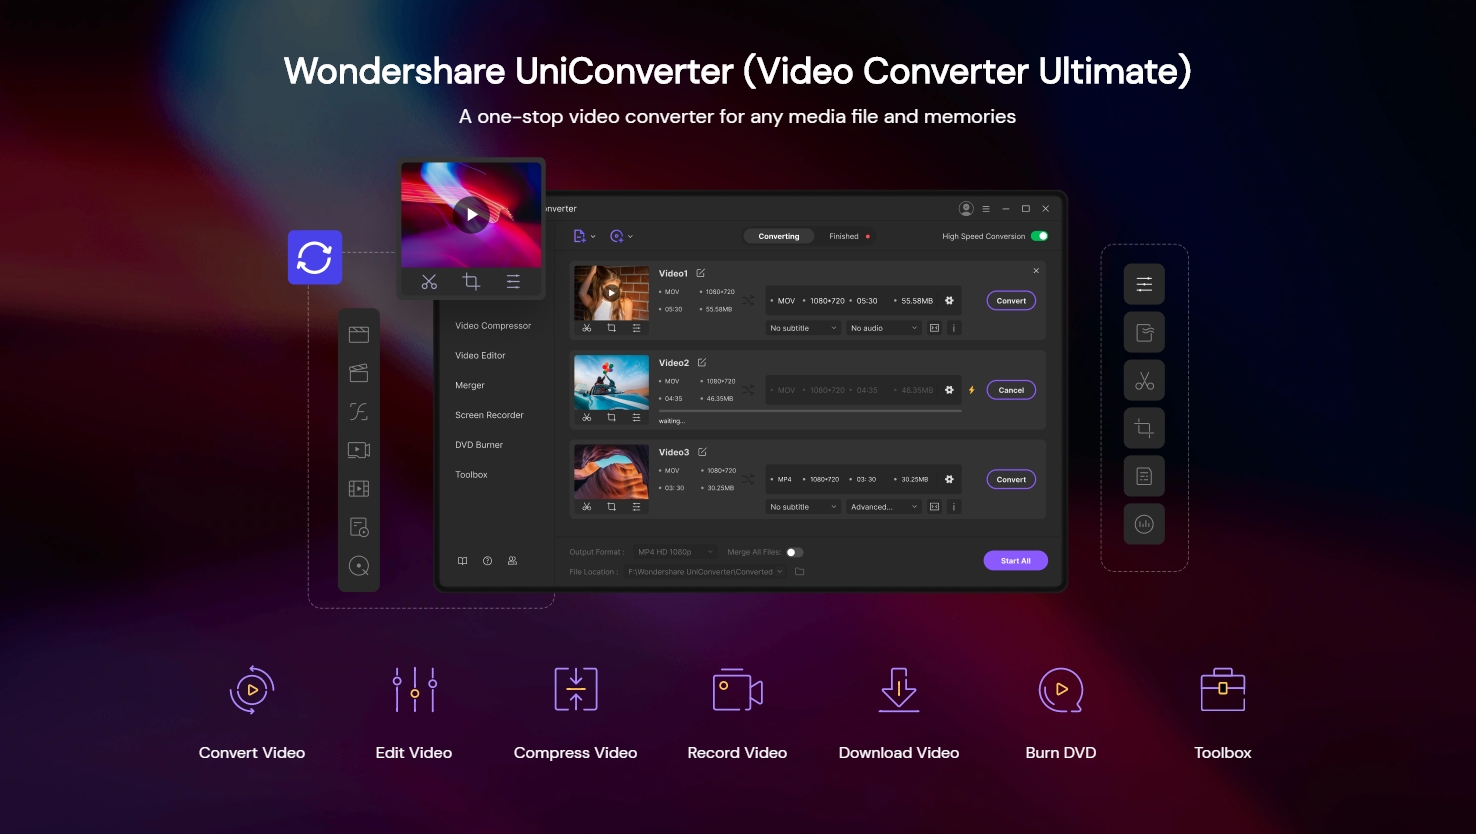 Wondershare UniConverter12 Released: A Complete Video Toolbox - Become More  Powerful | Business Wire